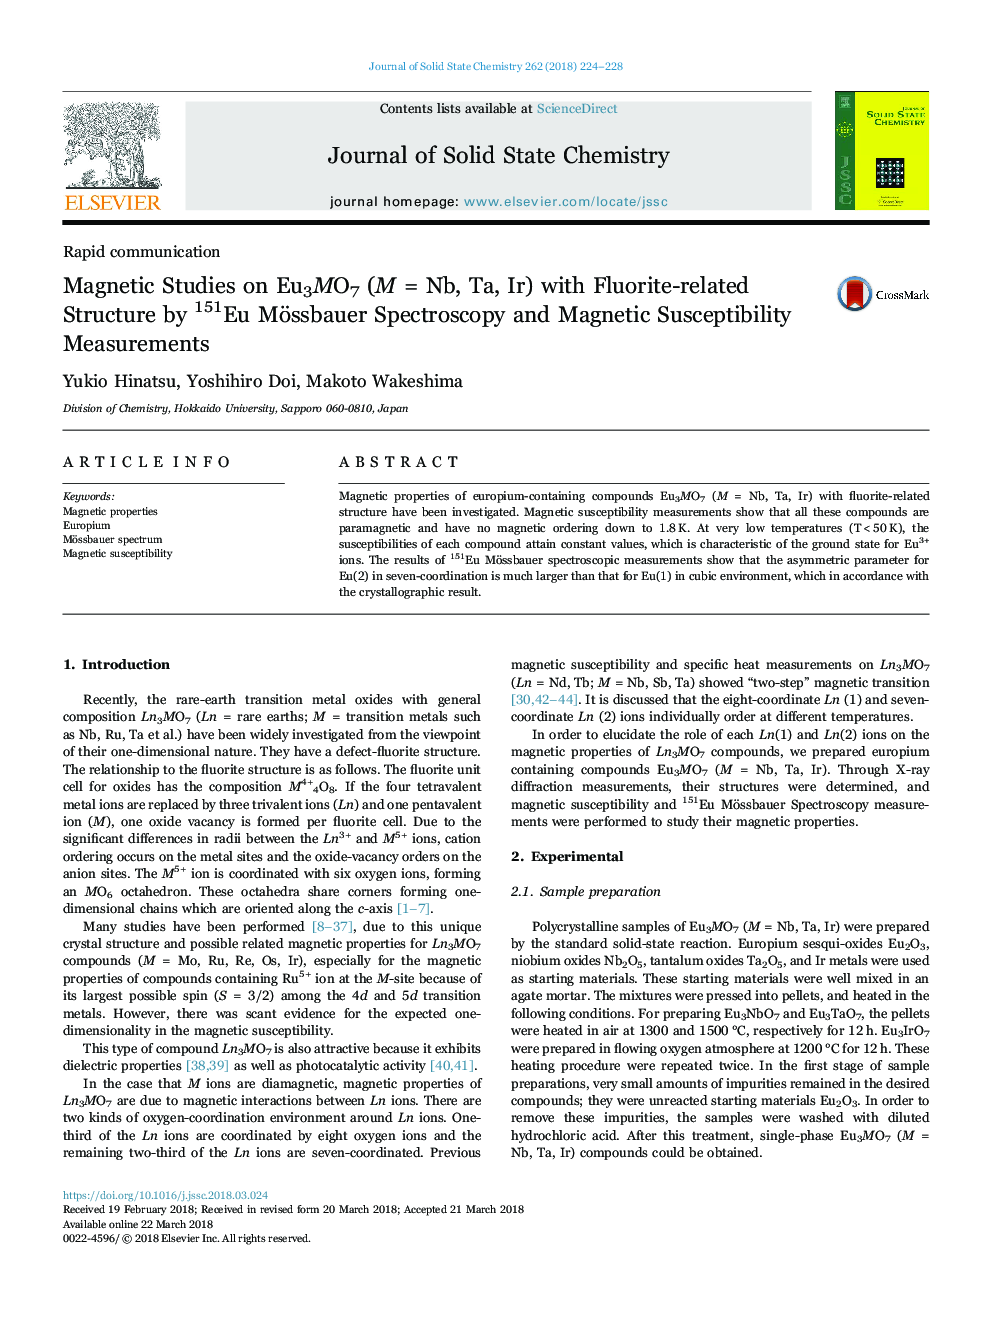 Magnetic Studies on Eu3MO7 (M = Nb, Ta, Ir) with Fluorite-related Structure by 151Eu Mössbauer Spectroscopy and Magnetic Susceptibility Measurements